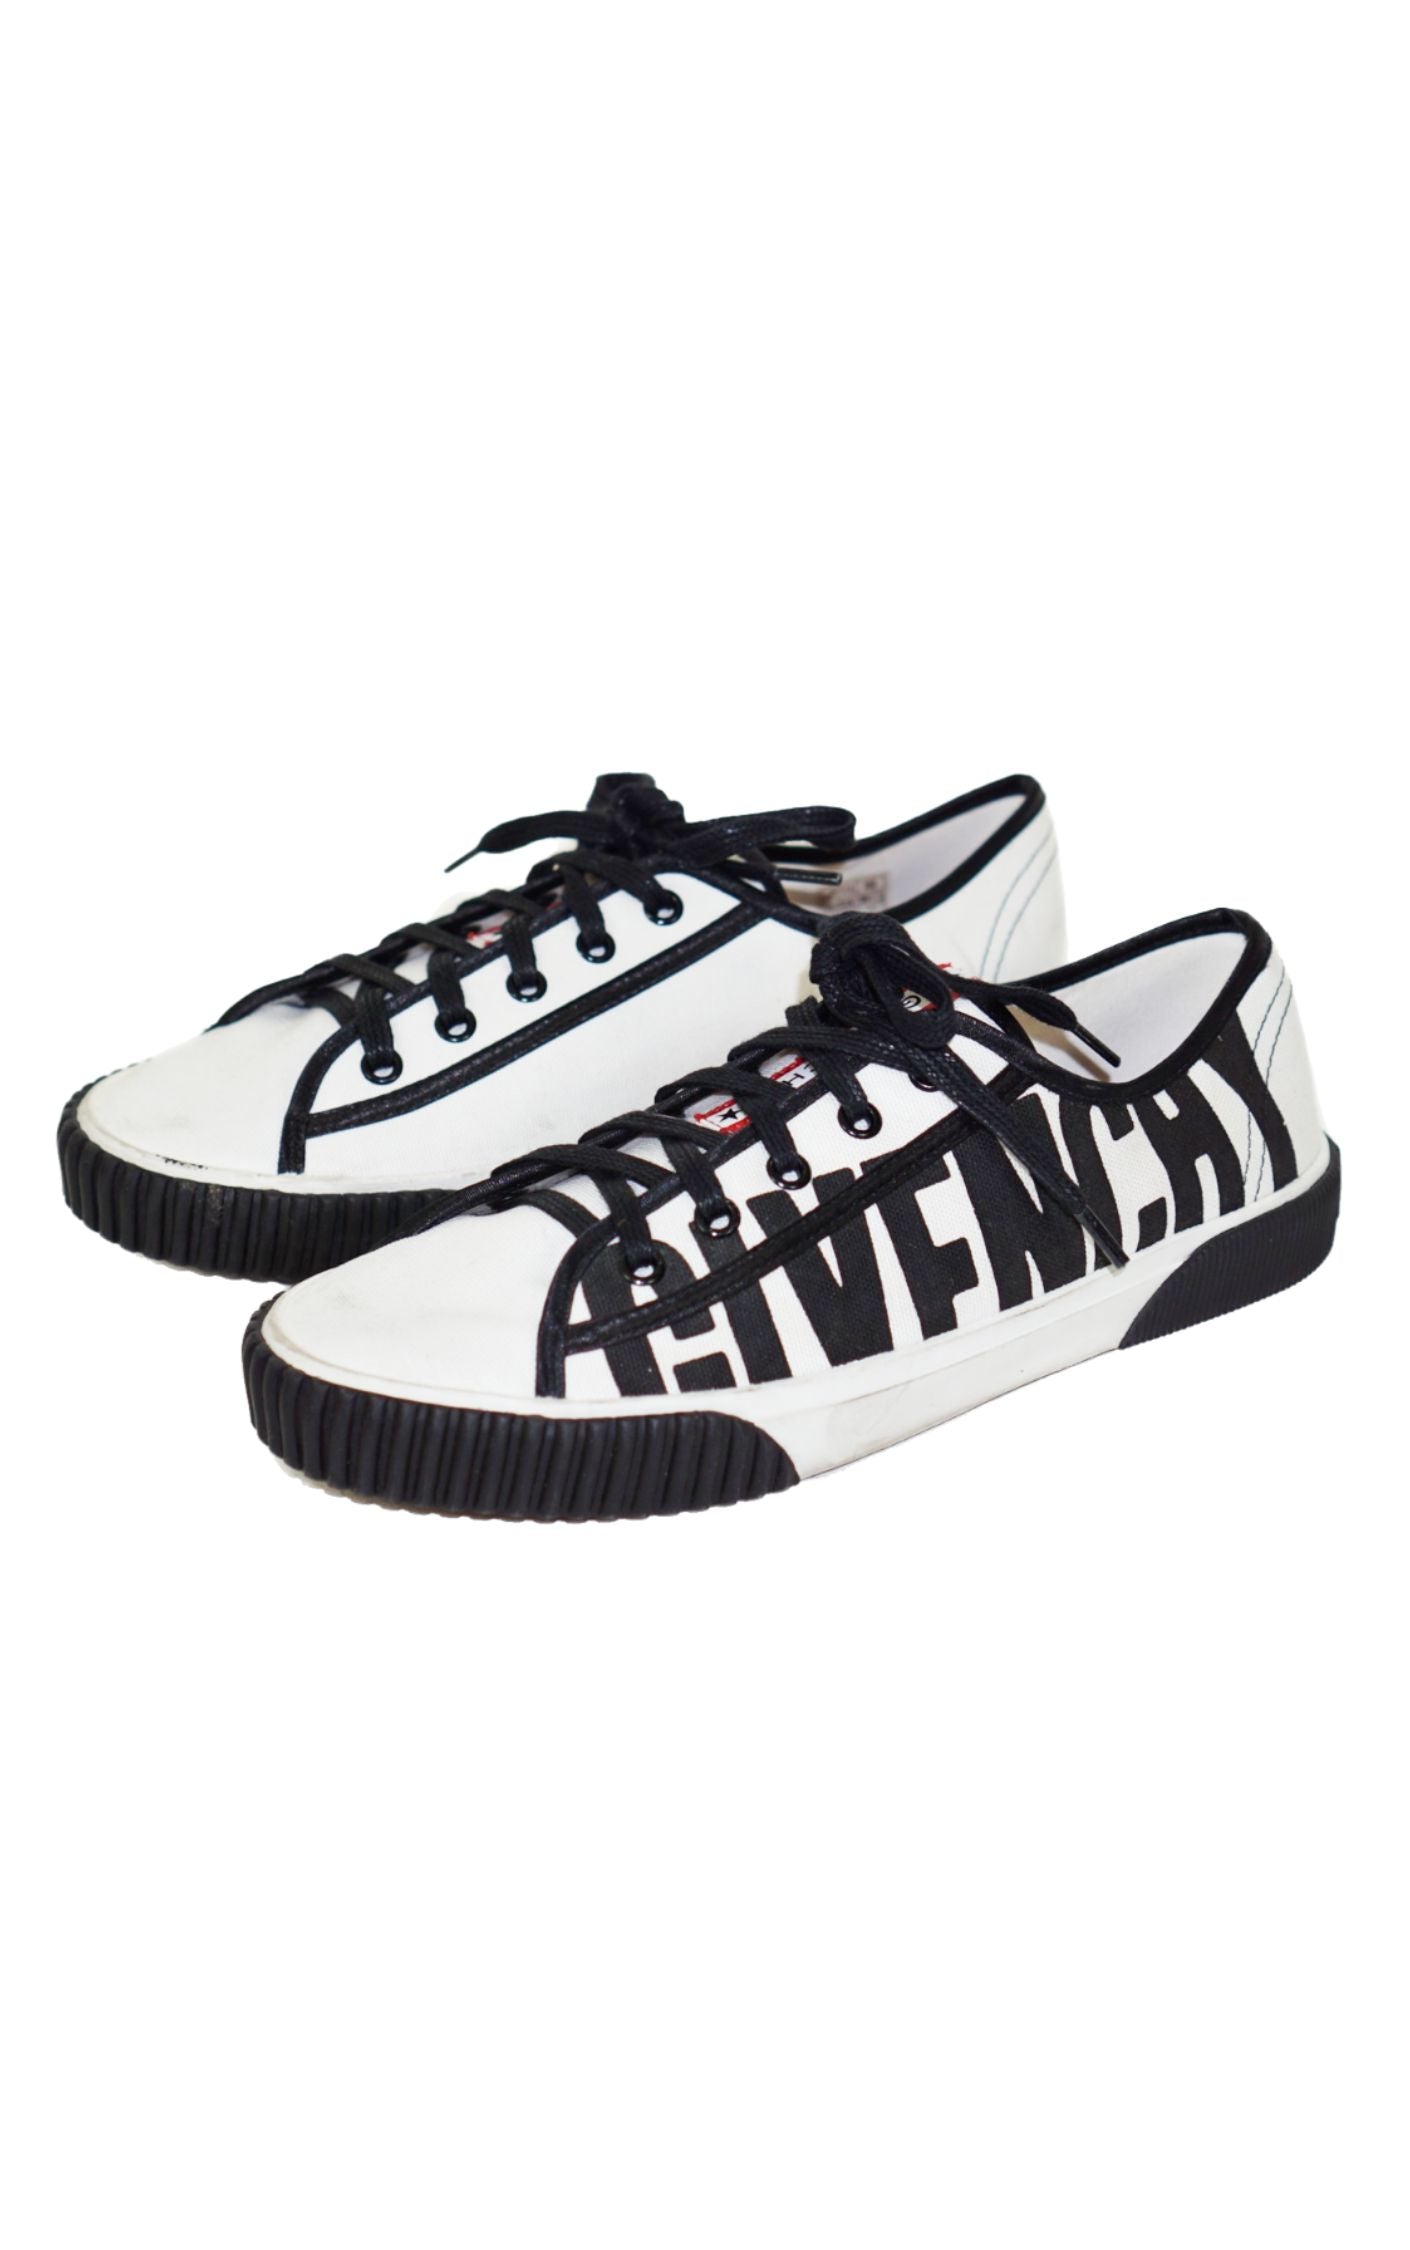 GIVENCHY Logo White Black Boxing Canvas Sneakers